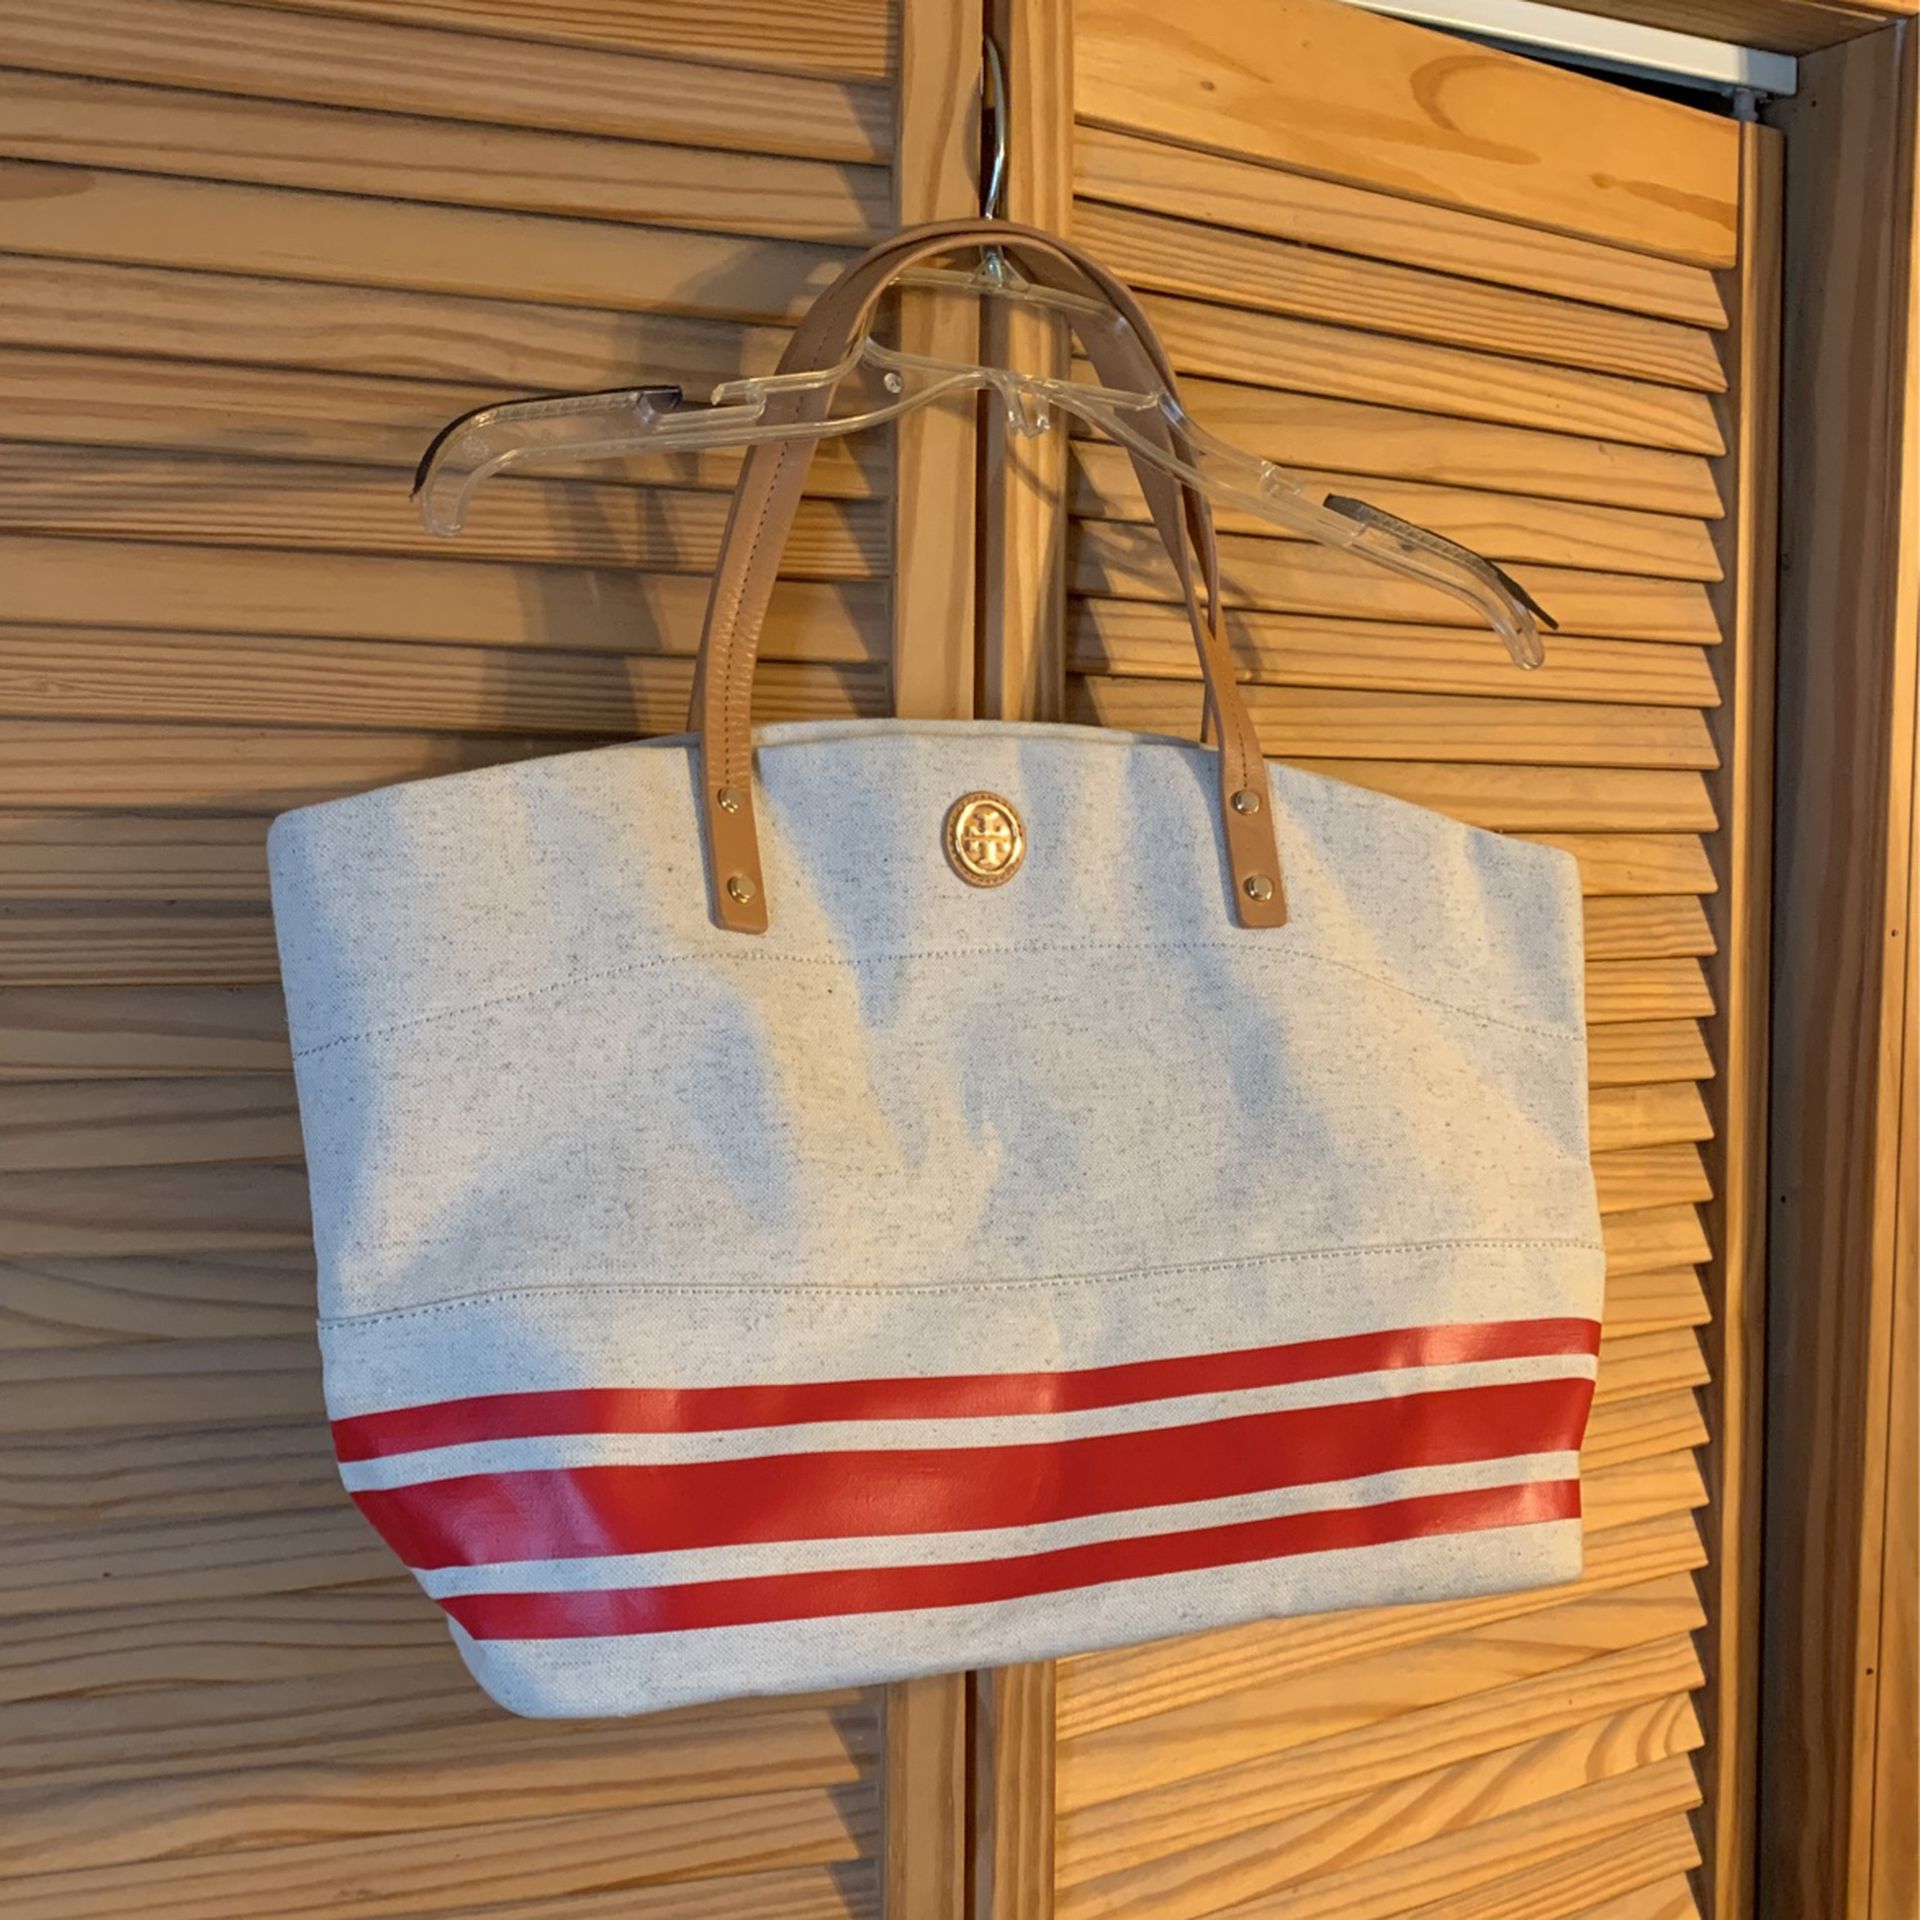 Authentic Tory Burch canvas tote/purse for Sale in Naugatuck, CT